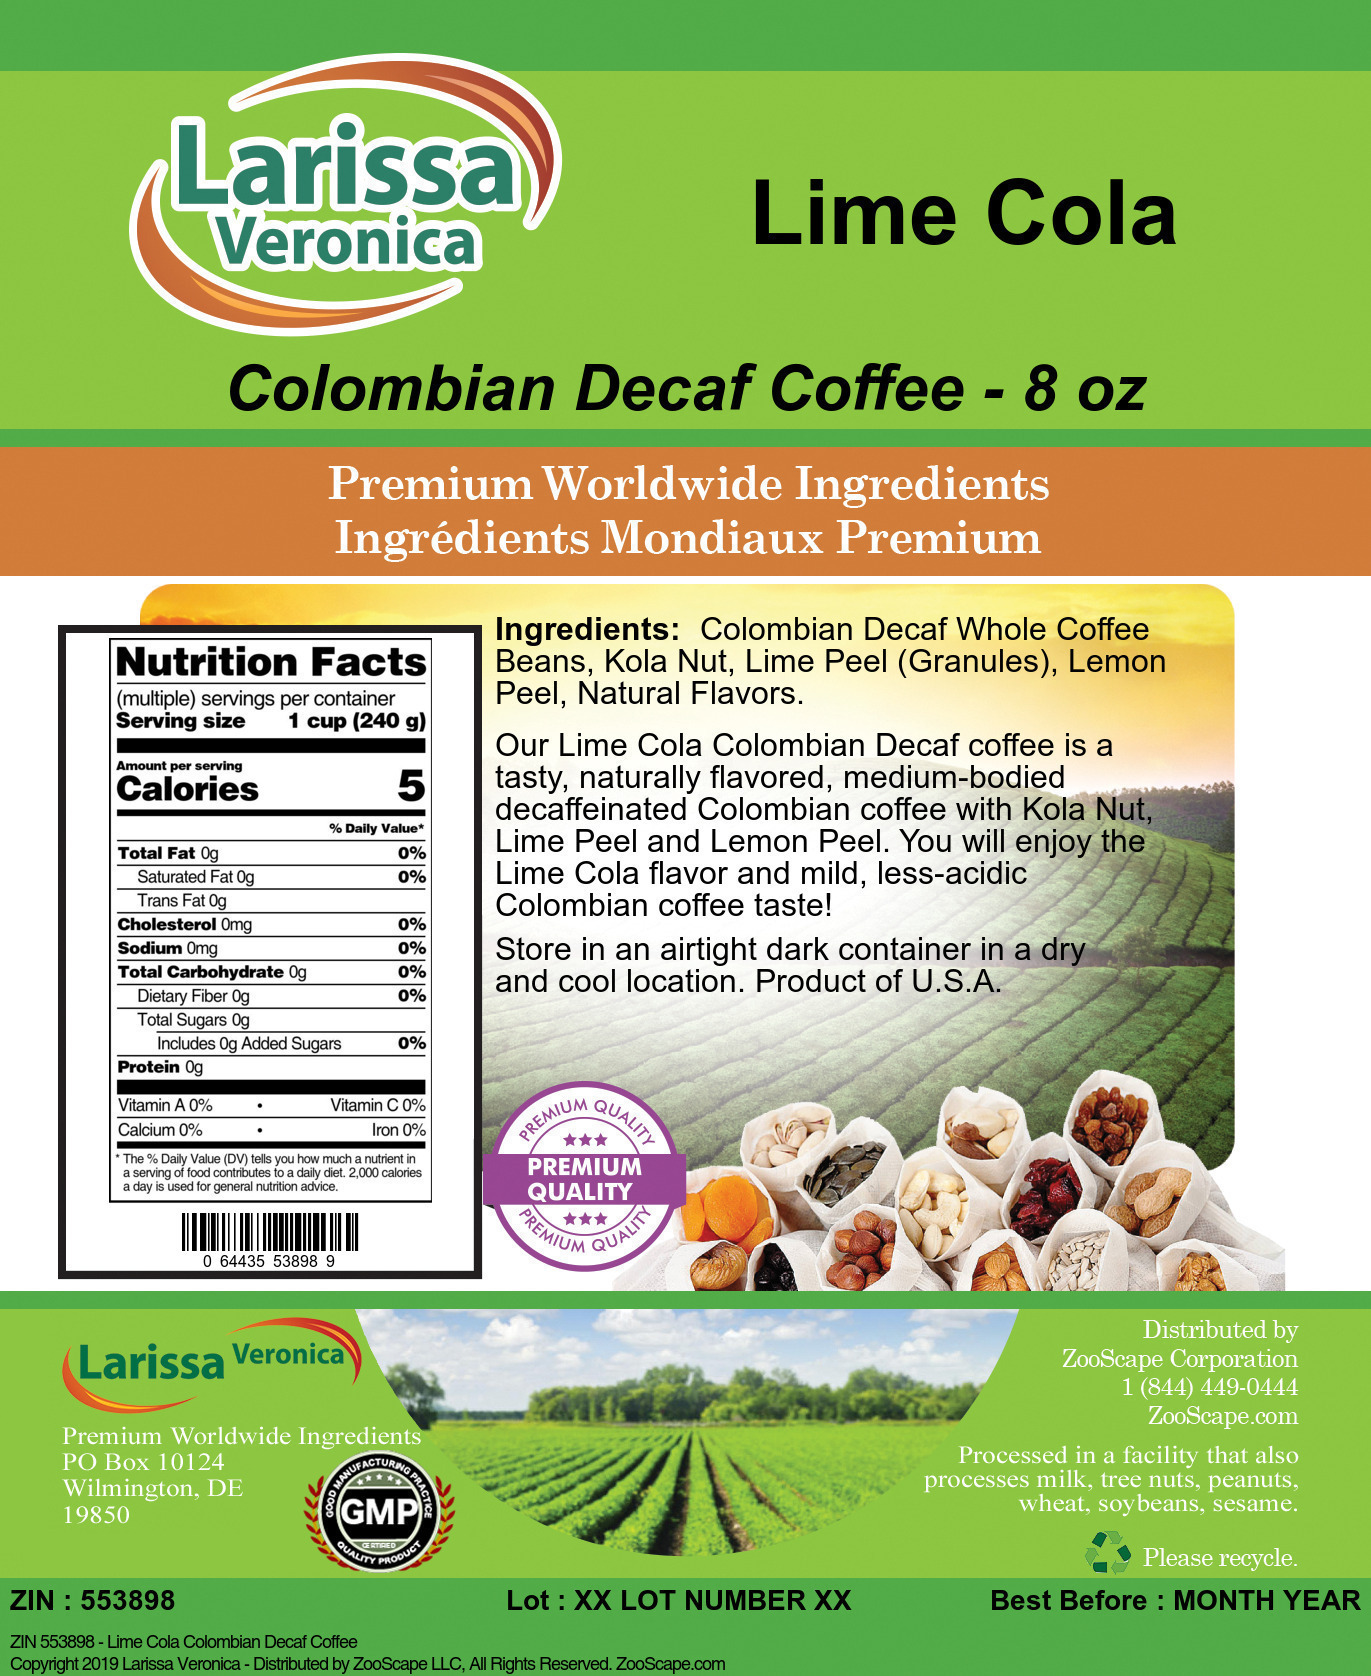 Lime Cola Colombian Decaf Coffee - Label